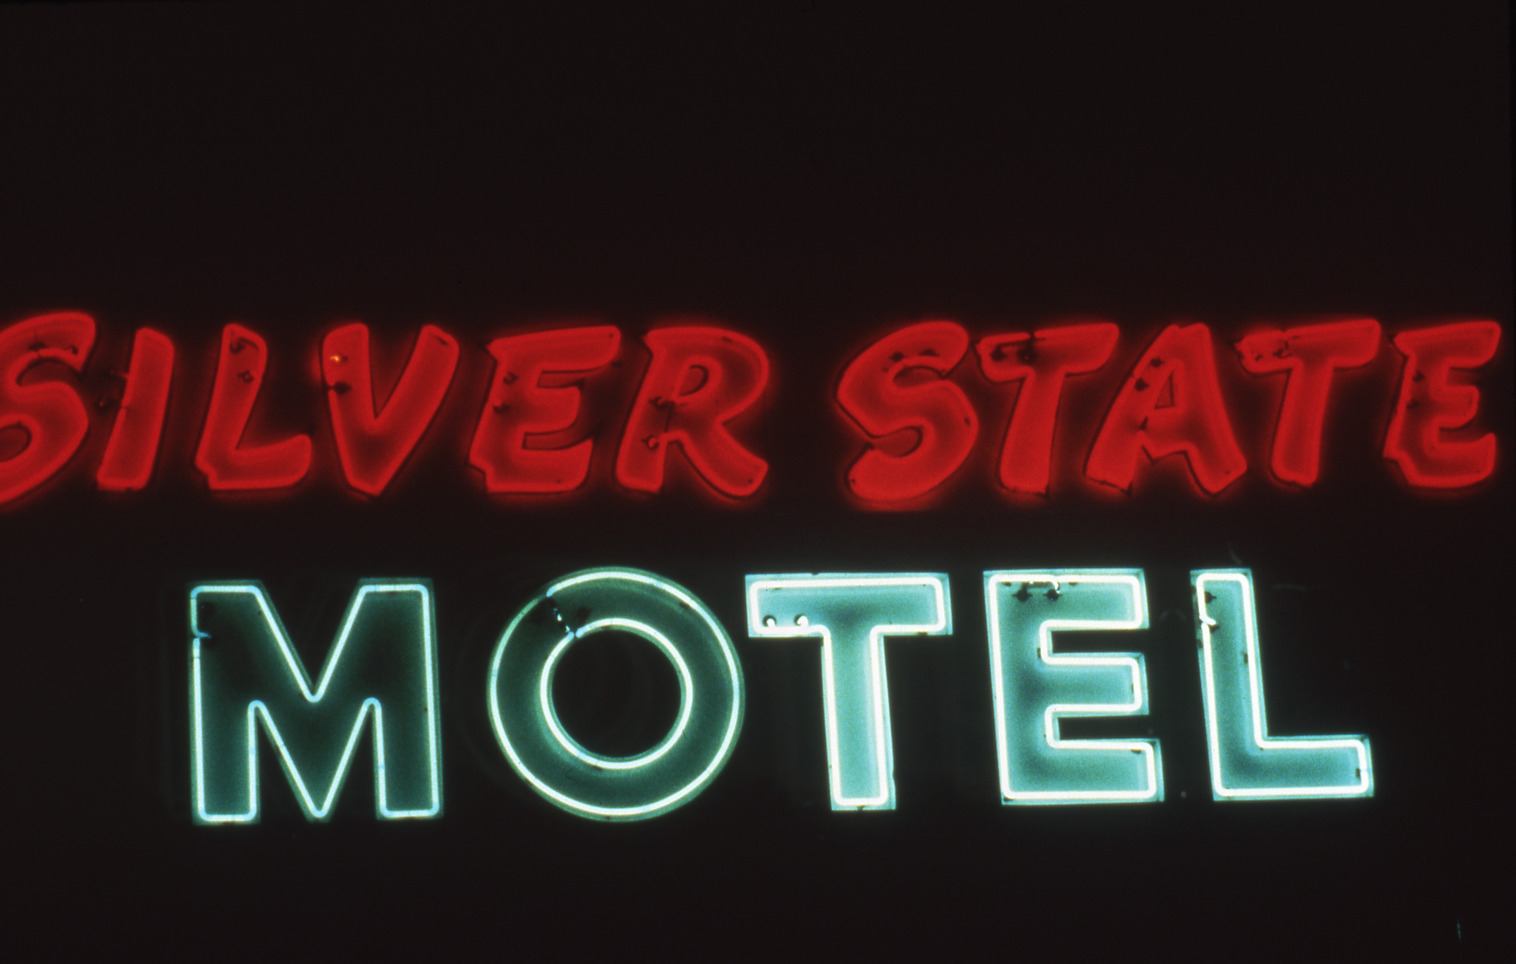 Silver State Motel mounted marquee** sign, Reno, Nevada: photographic print